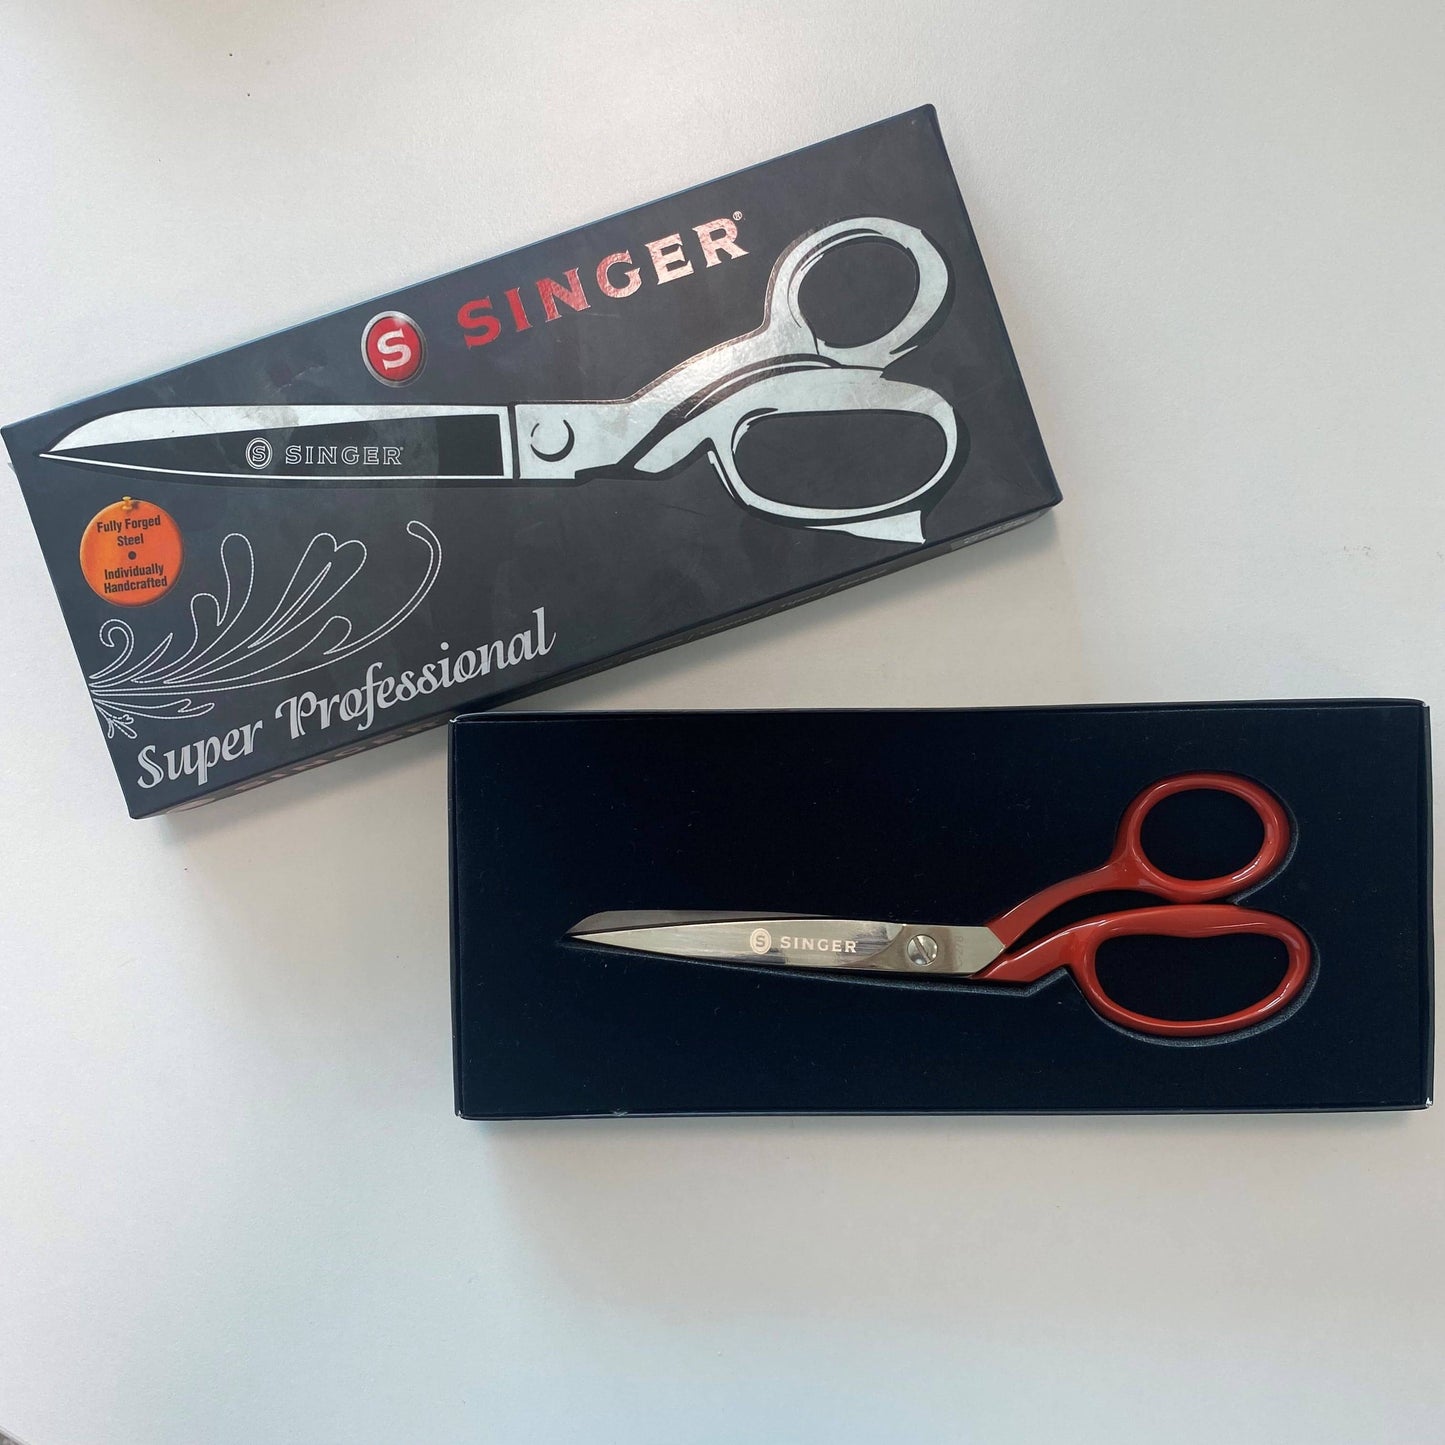 Singer Super Professional 8" Serrated Shears (Red Handle)